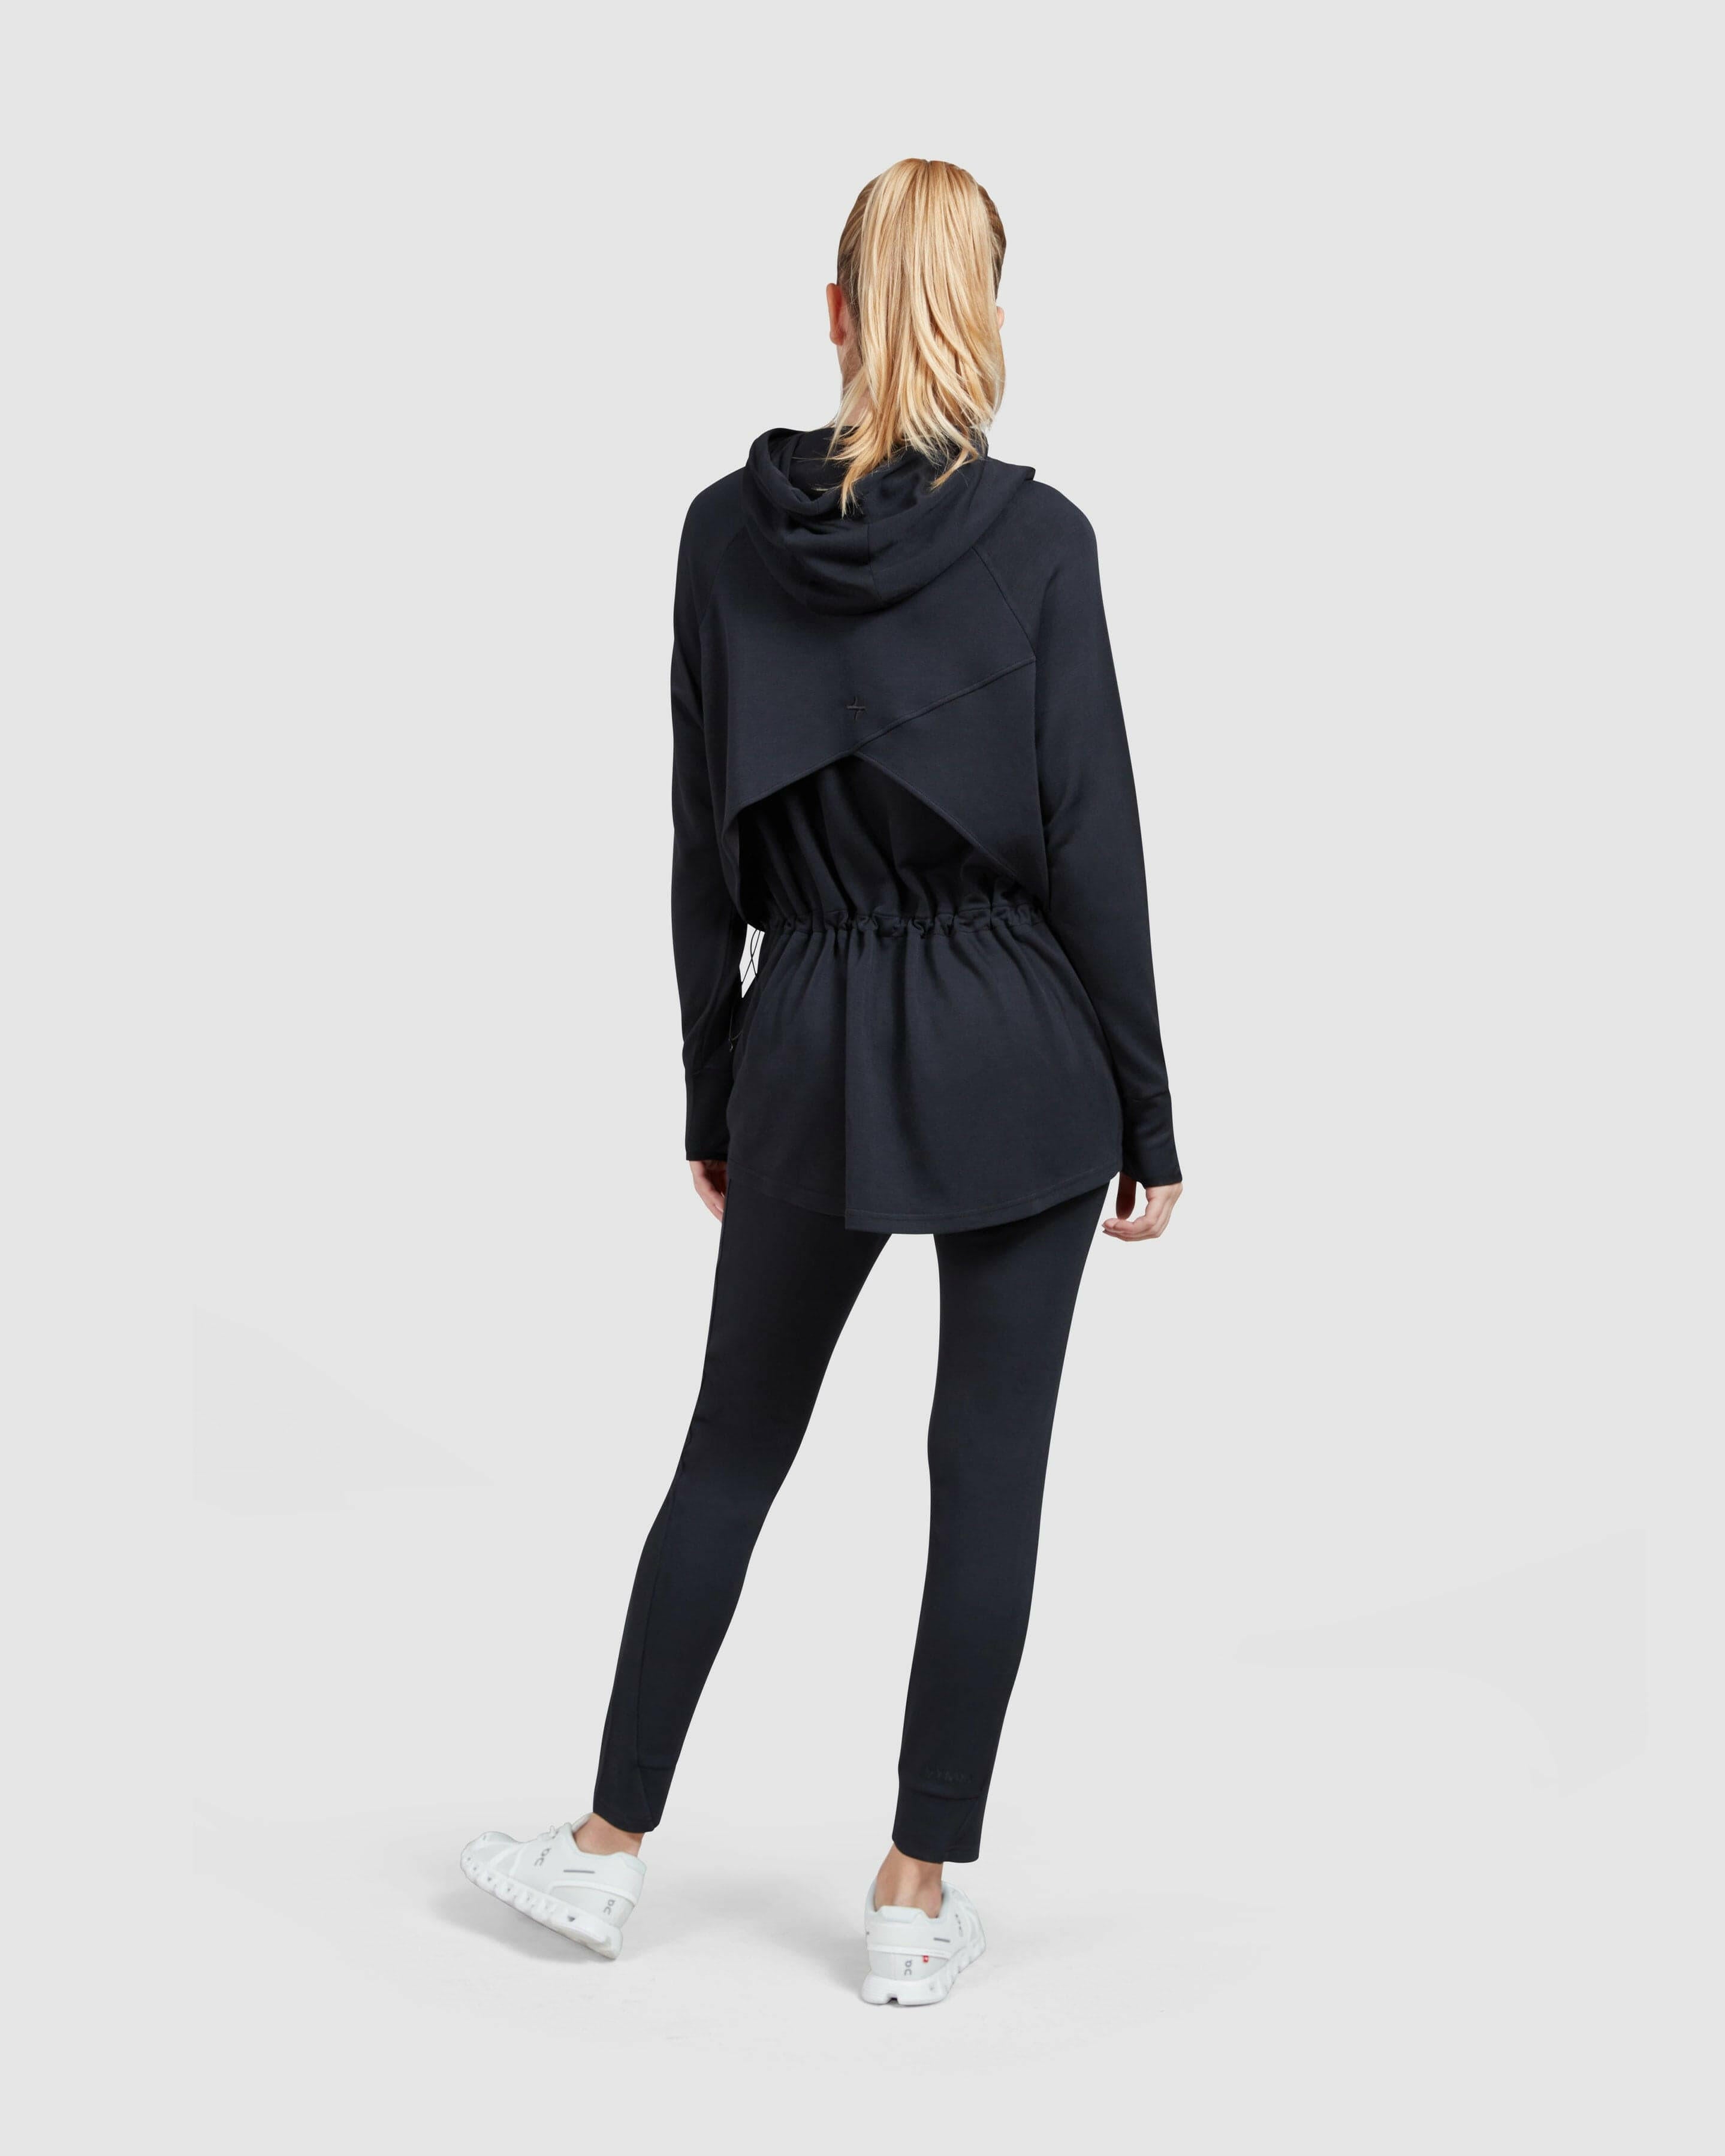 A model from behind in a Black coordinated Modest JOG JOGGER by Qynda.